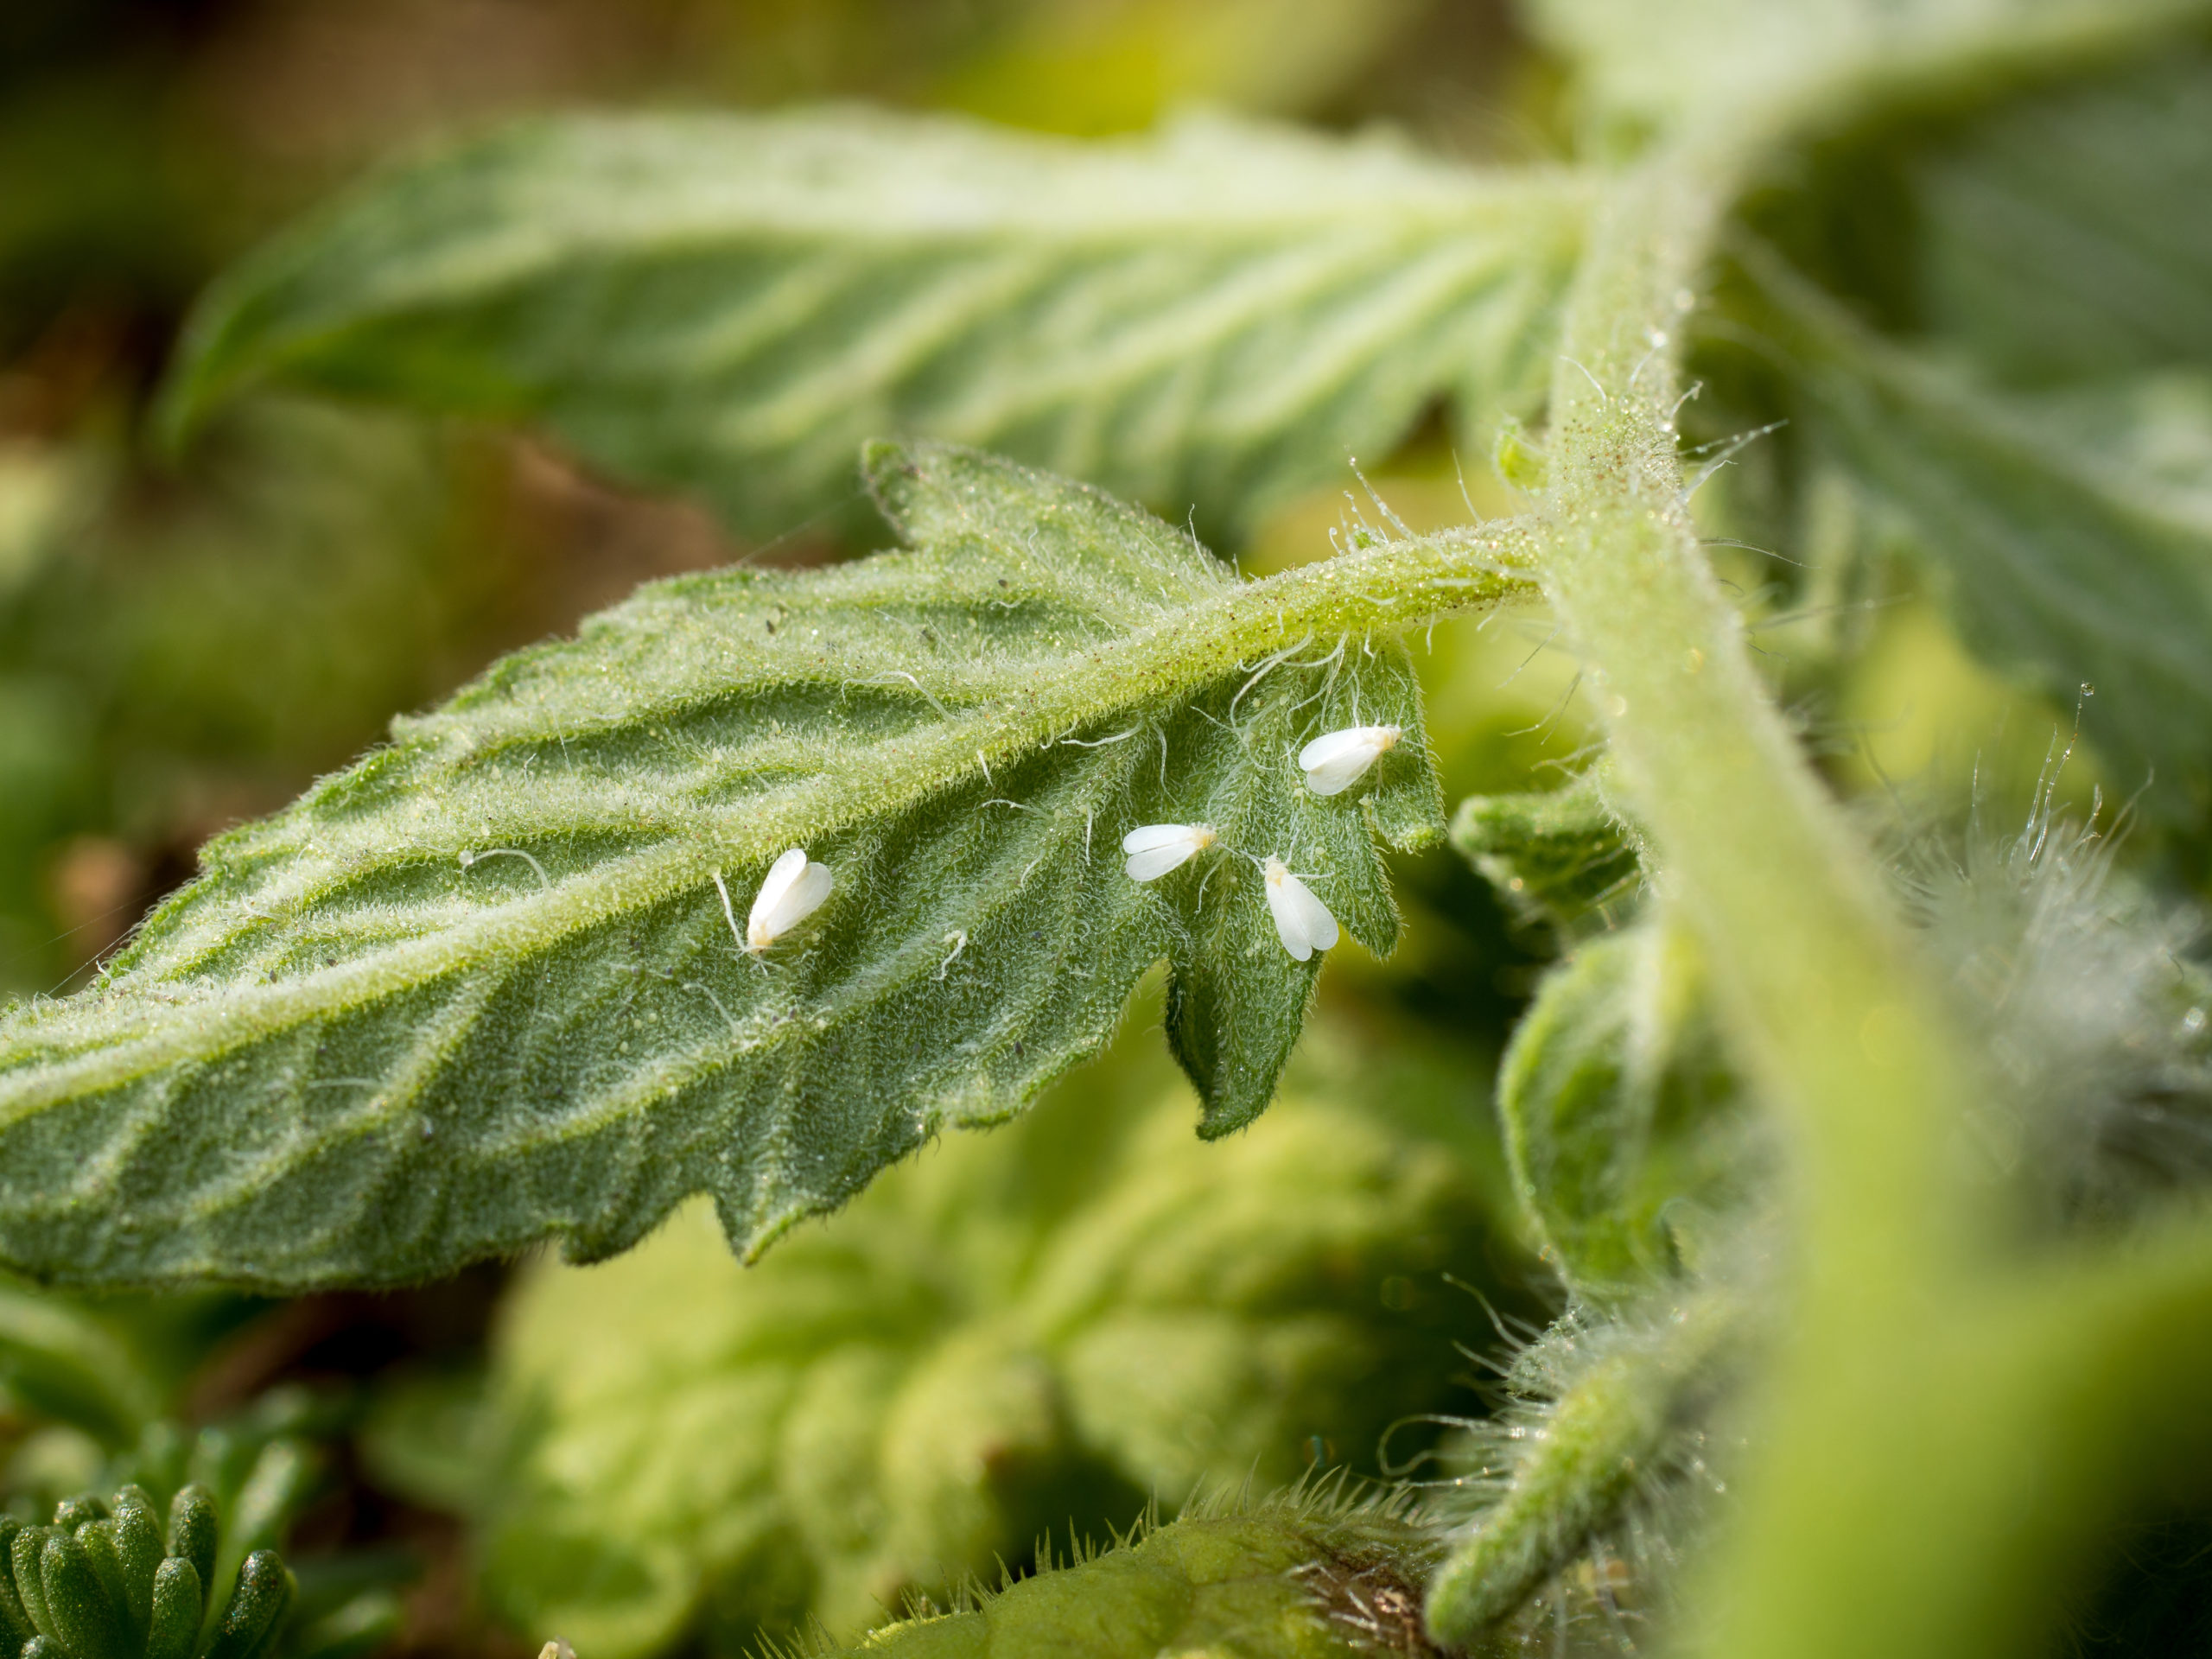 What Are Whiteflies?